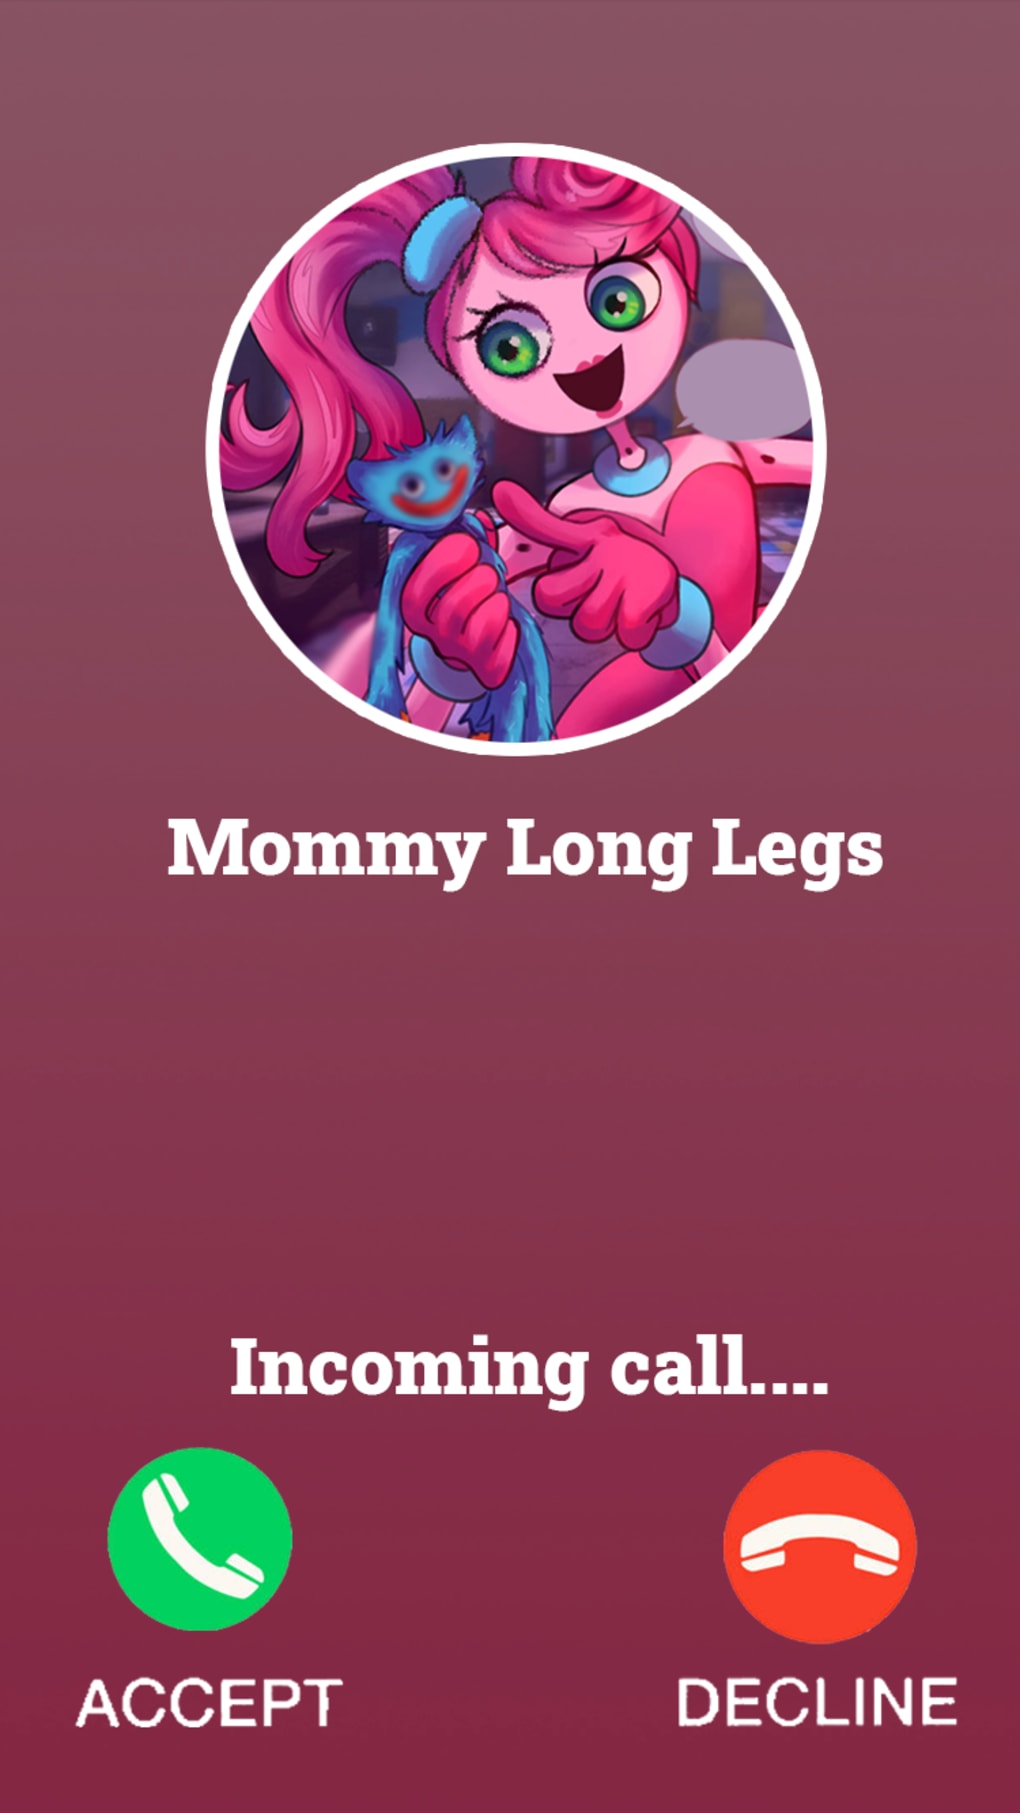 Download do APK de Mommy Long Legs Poppy 2 Tips para Android